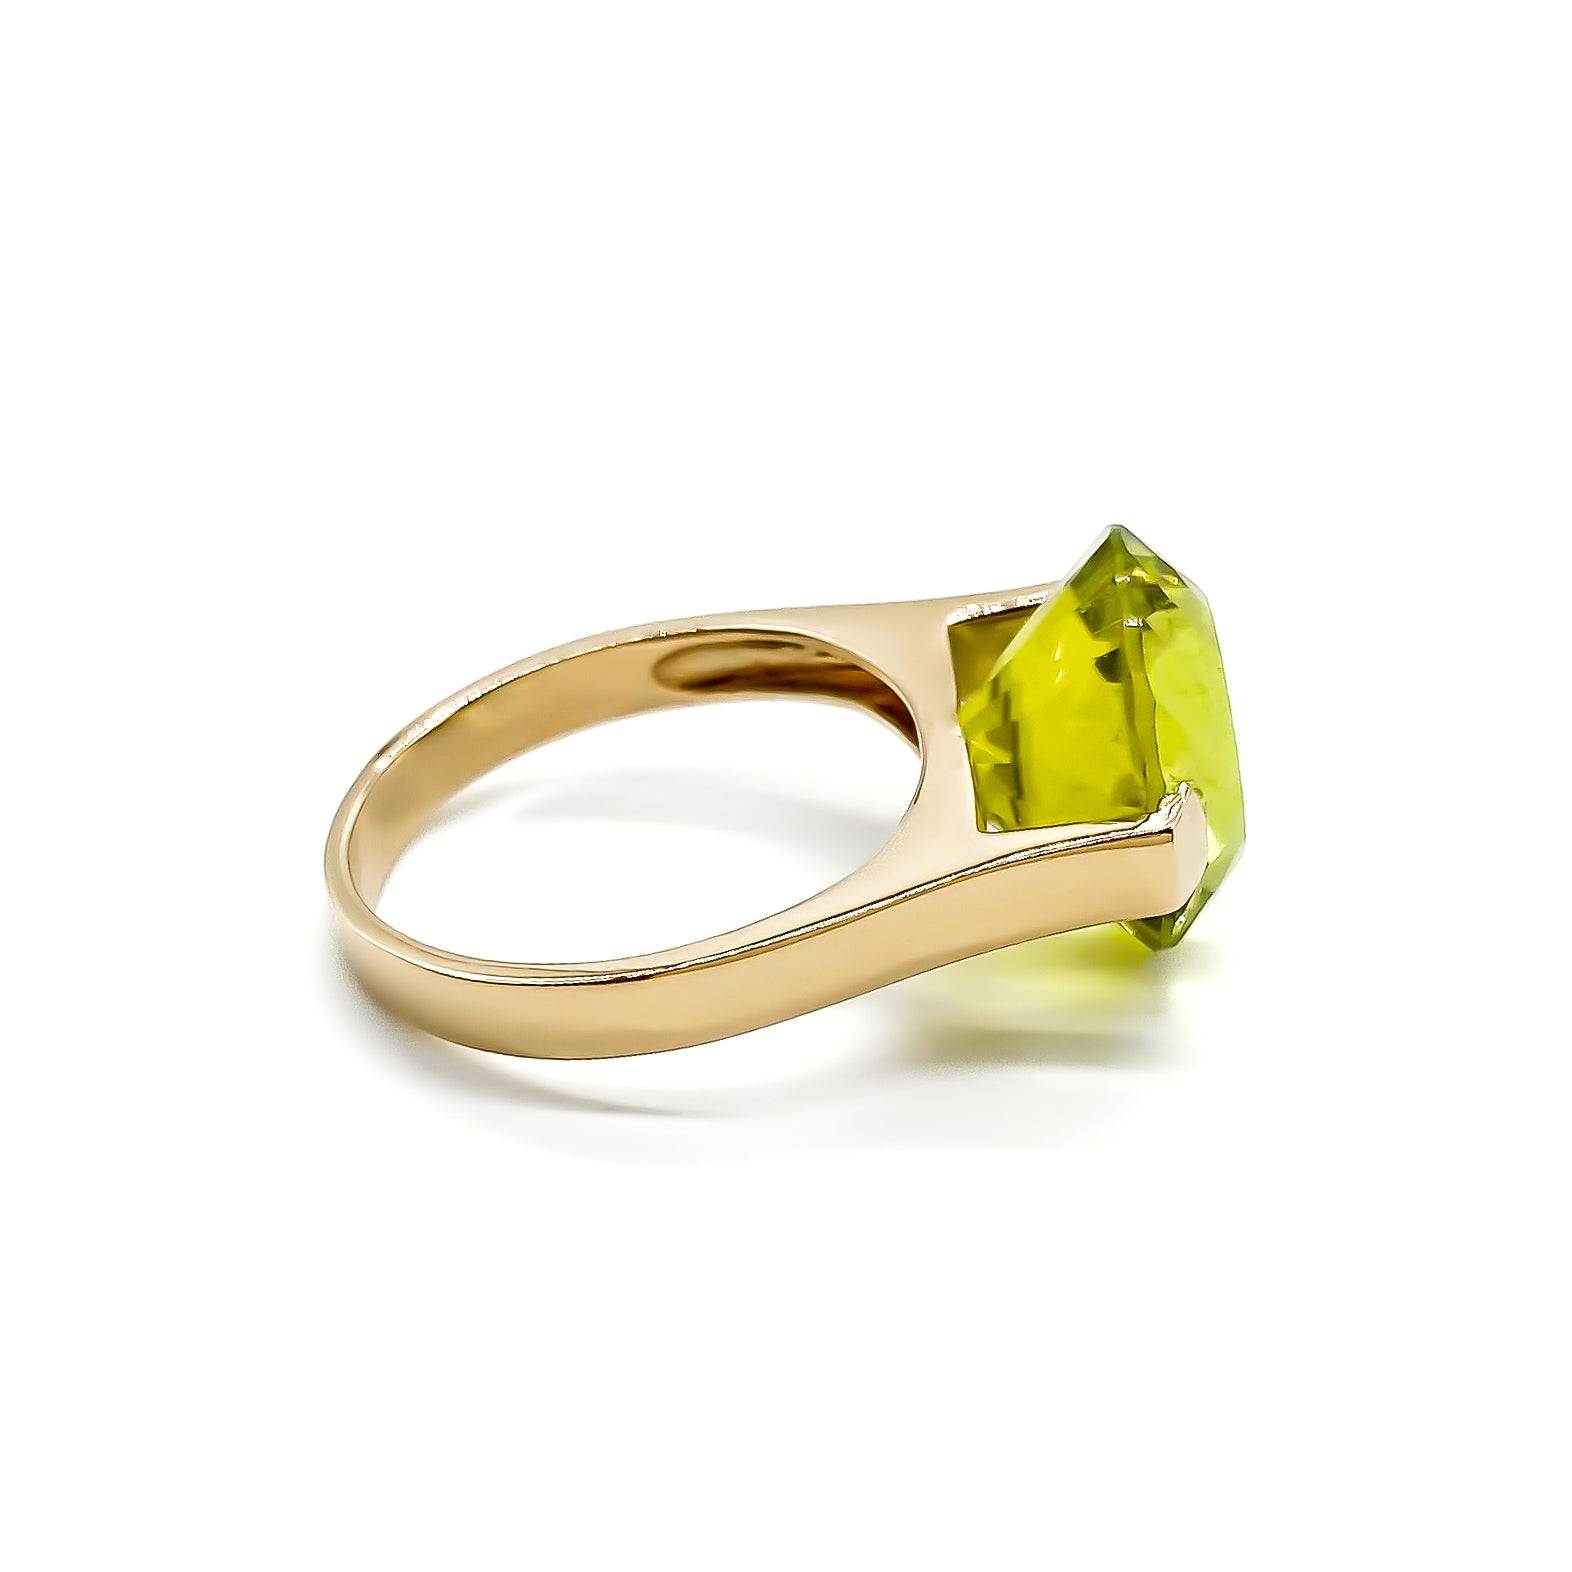 Stylish 14ct rose gold ring set with beautifully faceted bright green peridot stone.